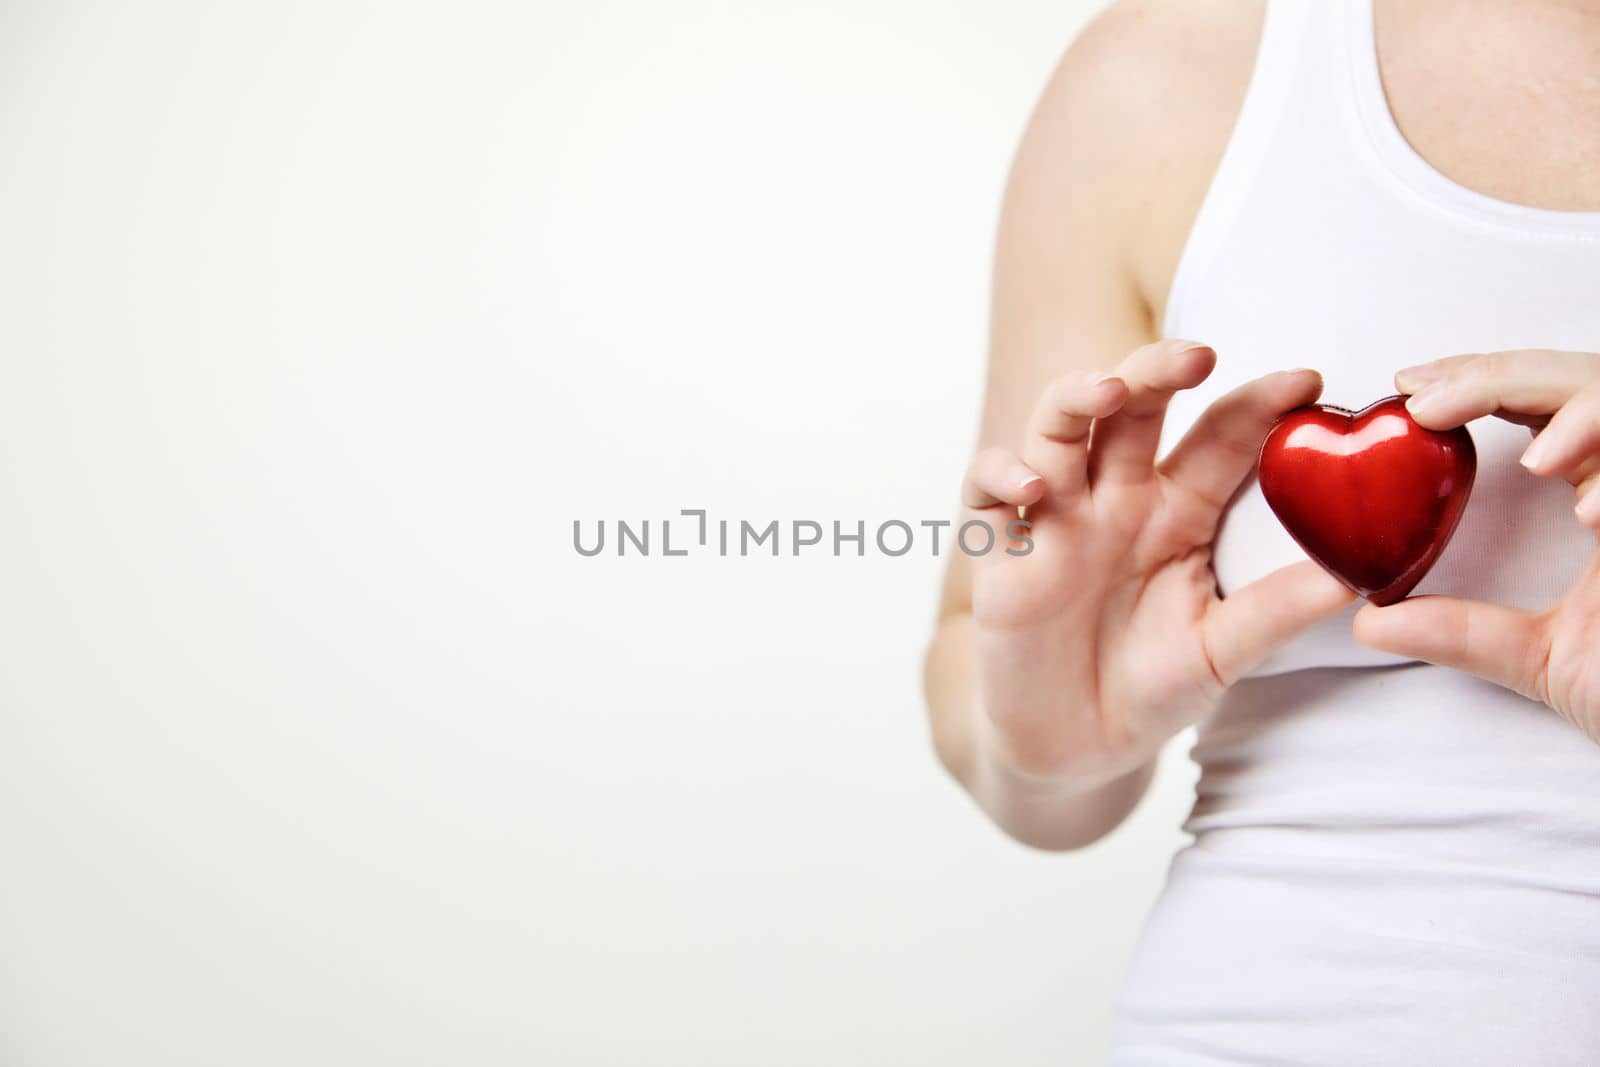 health, medicine and charity concept close up of female hands with small red heart holding for breast on white background copy space by Annebel146